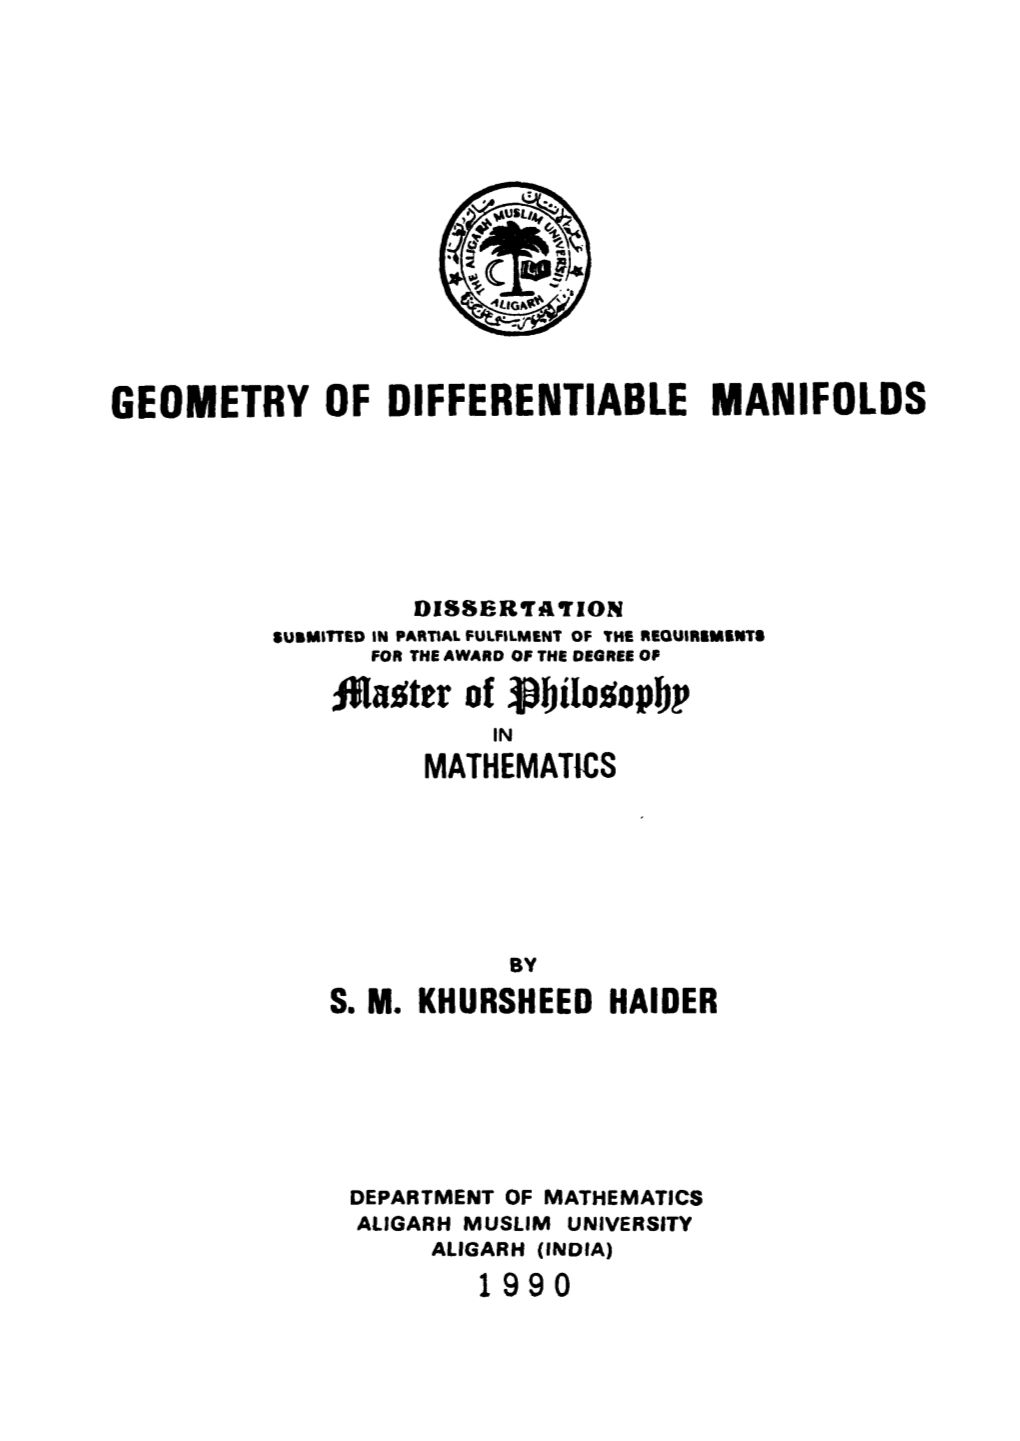 GEOMETRY of DIFFERENTIABLE MANIFOLDS Iila^Iter of ^Ulosiop^P